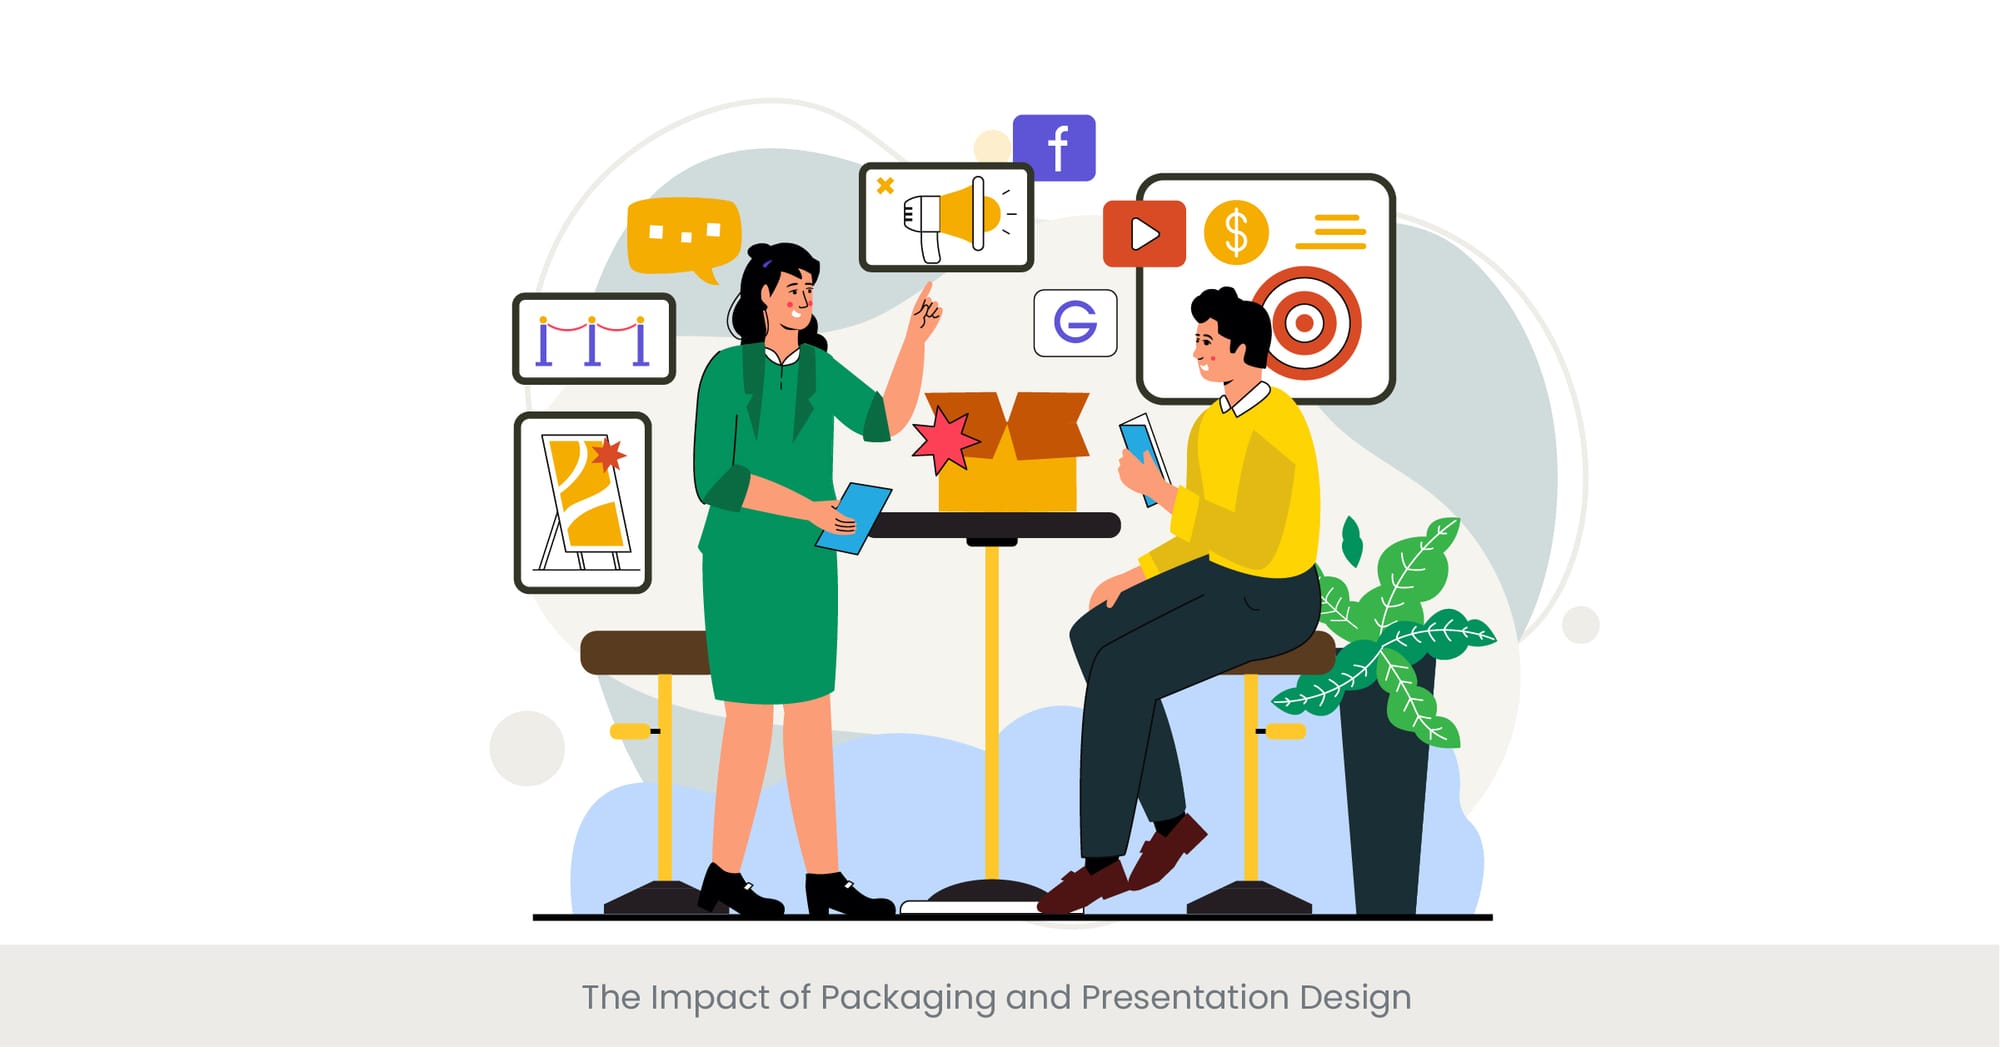 The Impact of Packaging and Presentation Design